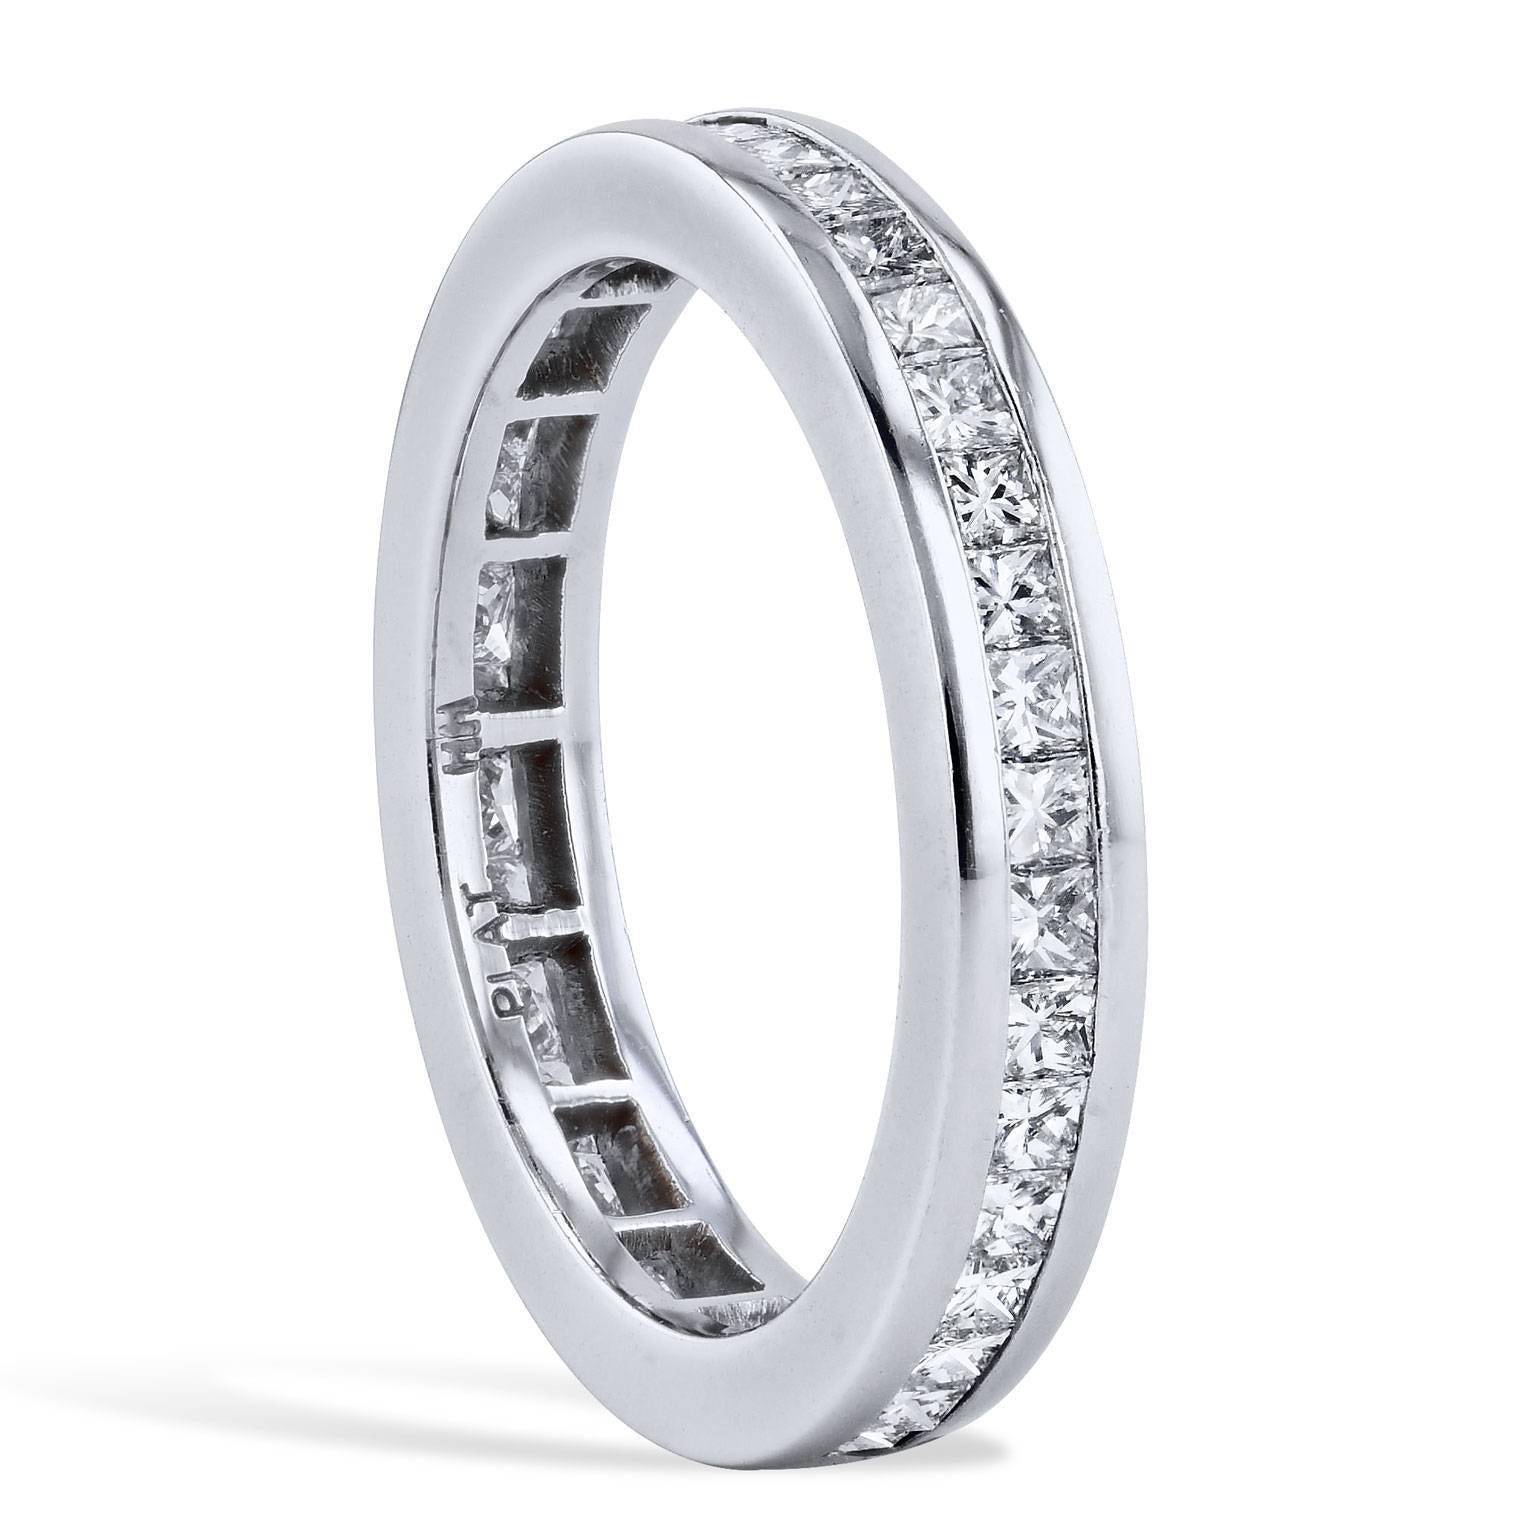 H&H 1.33 Carat Princess Cut Diamond Eternity Band Ring

This handmade diamond eternity band ring features 1.33 carat of princess cut channel set diamond. (F/G/VS1). 
Fashioned in platinum with satin finish, this ring reflects a marvelous display of